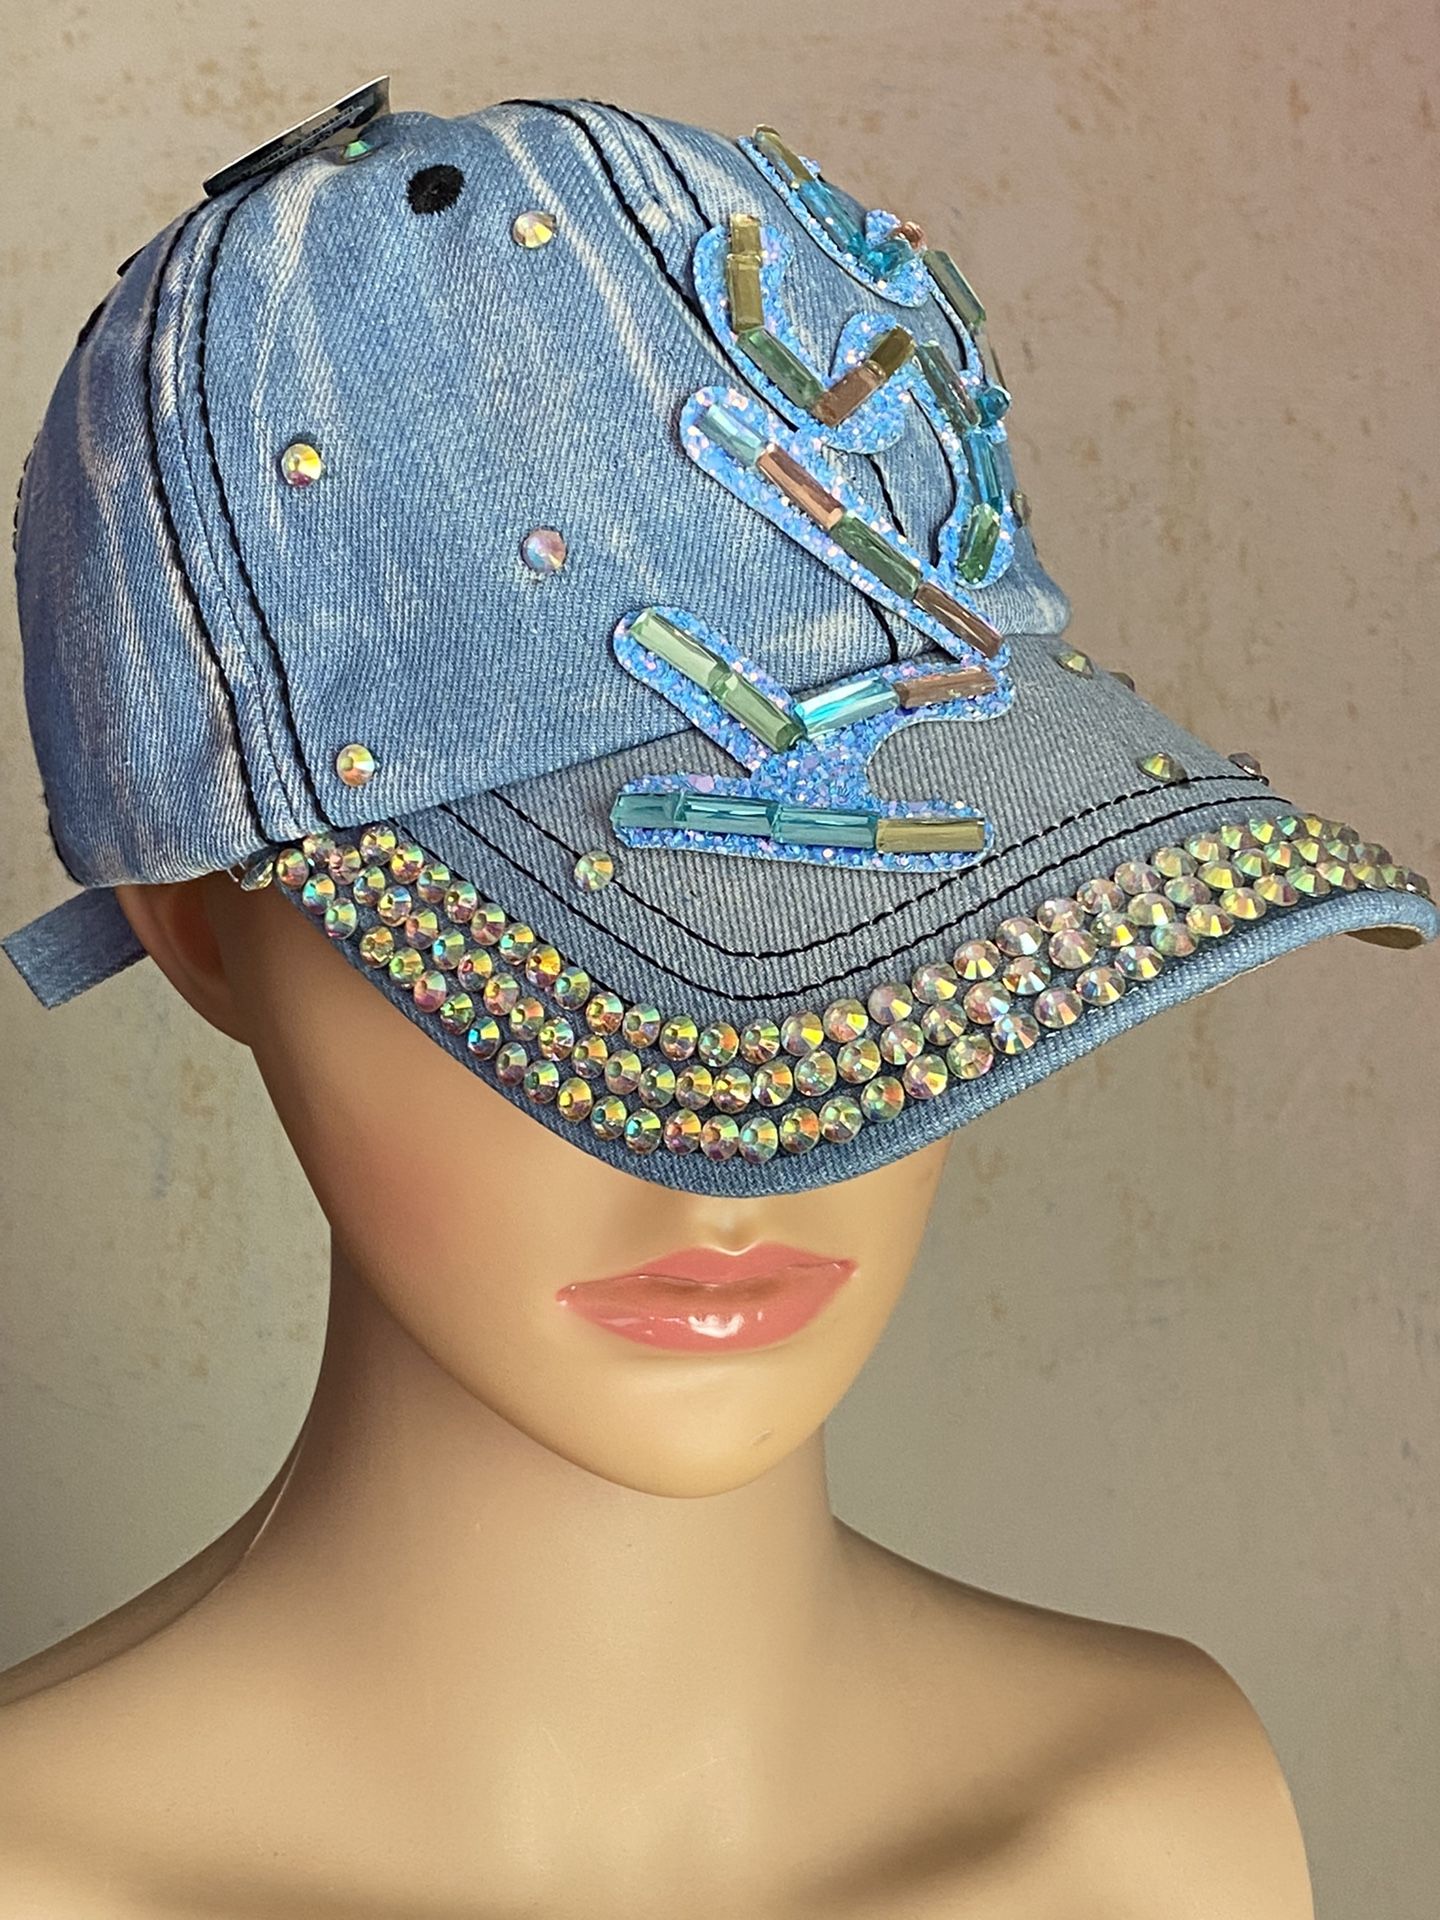 STYLE #3-KISS(LIGHT DENIM ). CUTE HAT W/BLING. SHINES & SHIMMERS IN THE LIGHT.